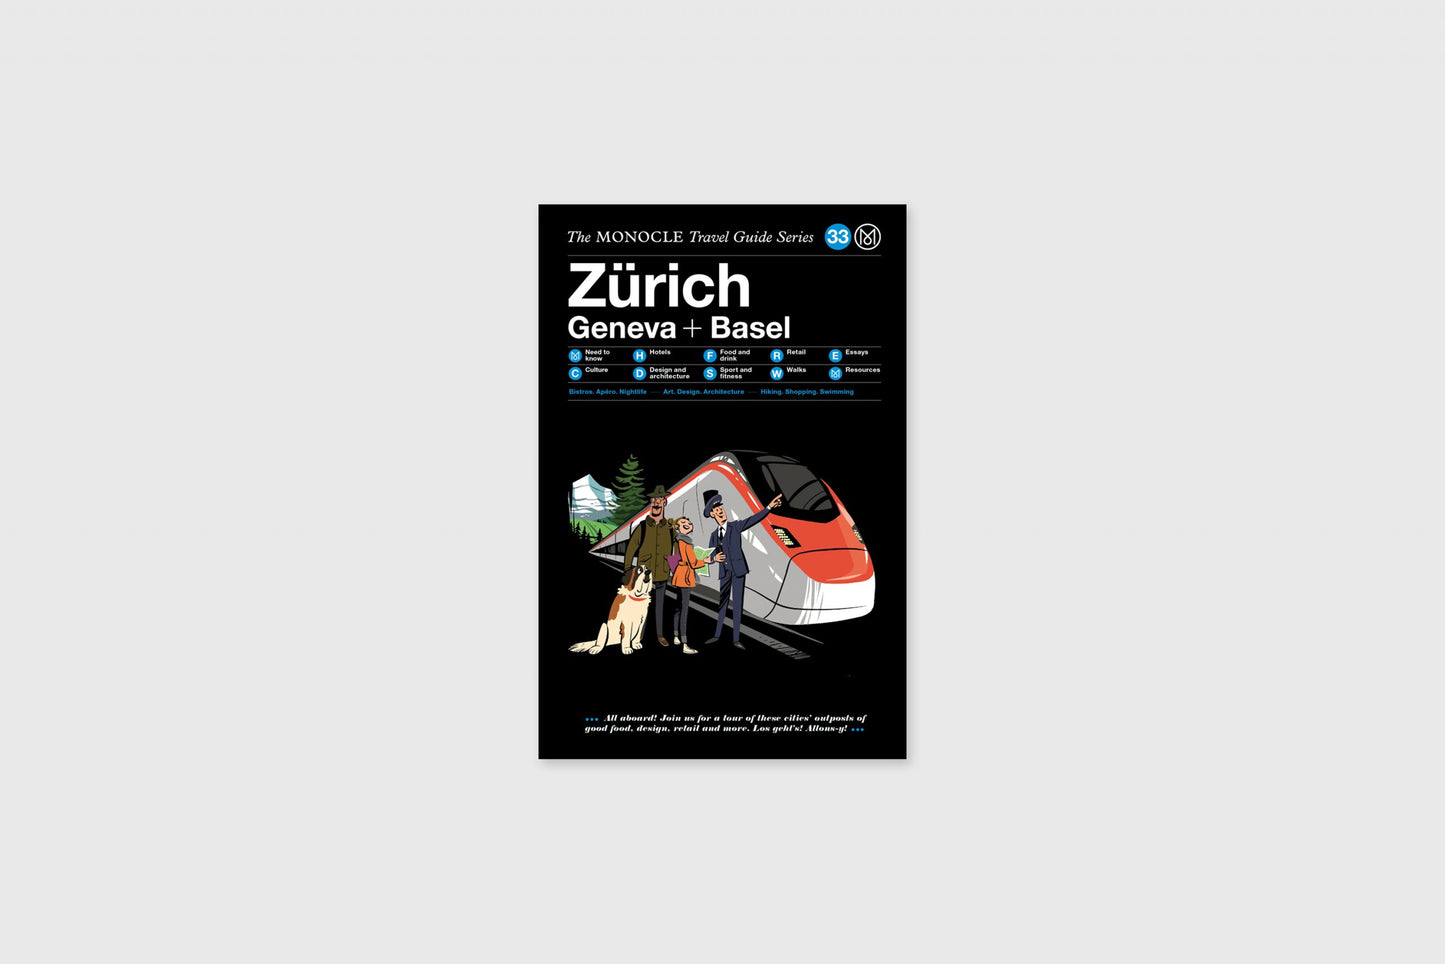 Zurich Geneva + Basel : The Monocle Travel Guide Series